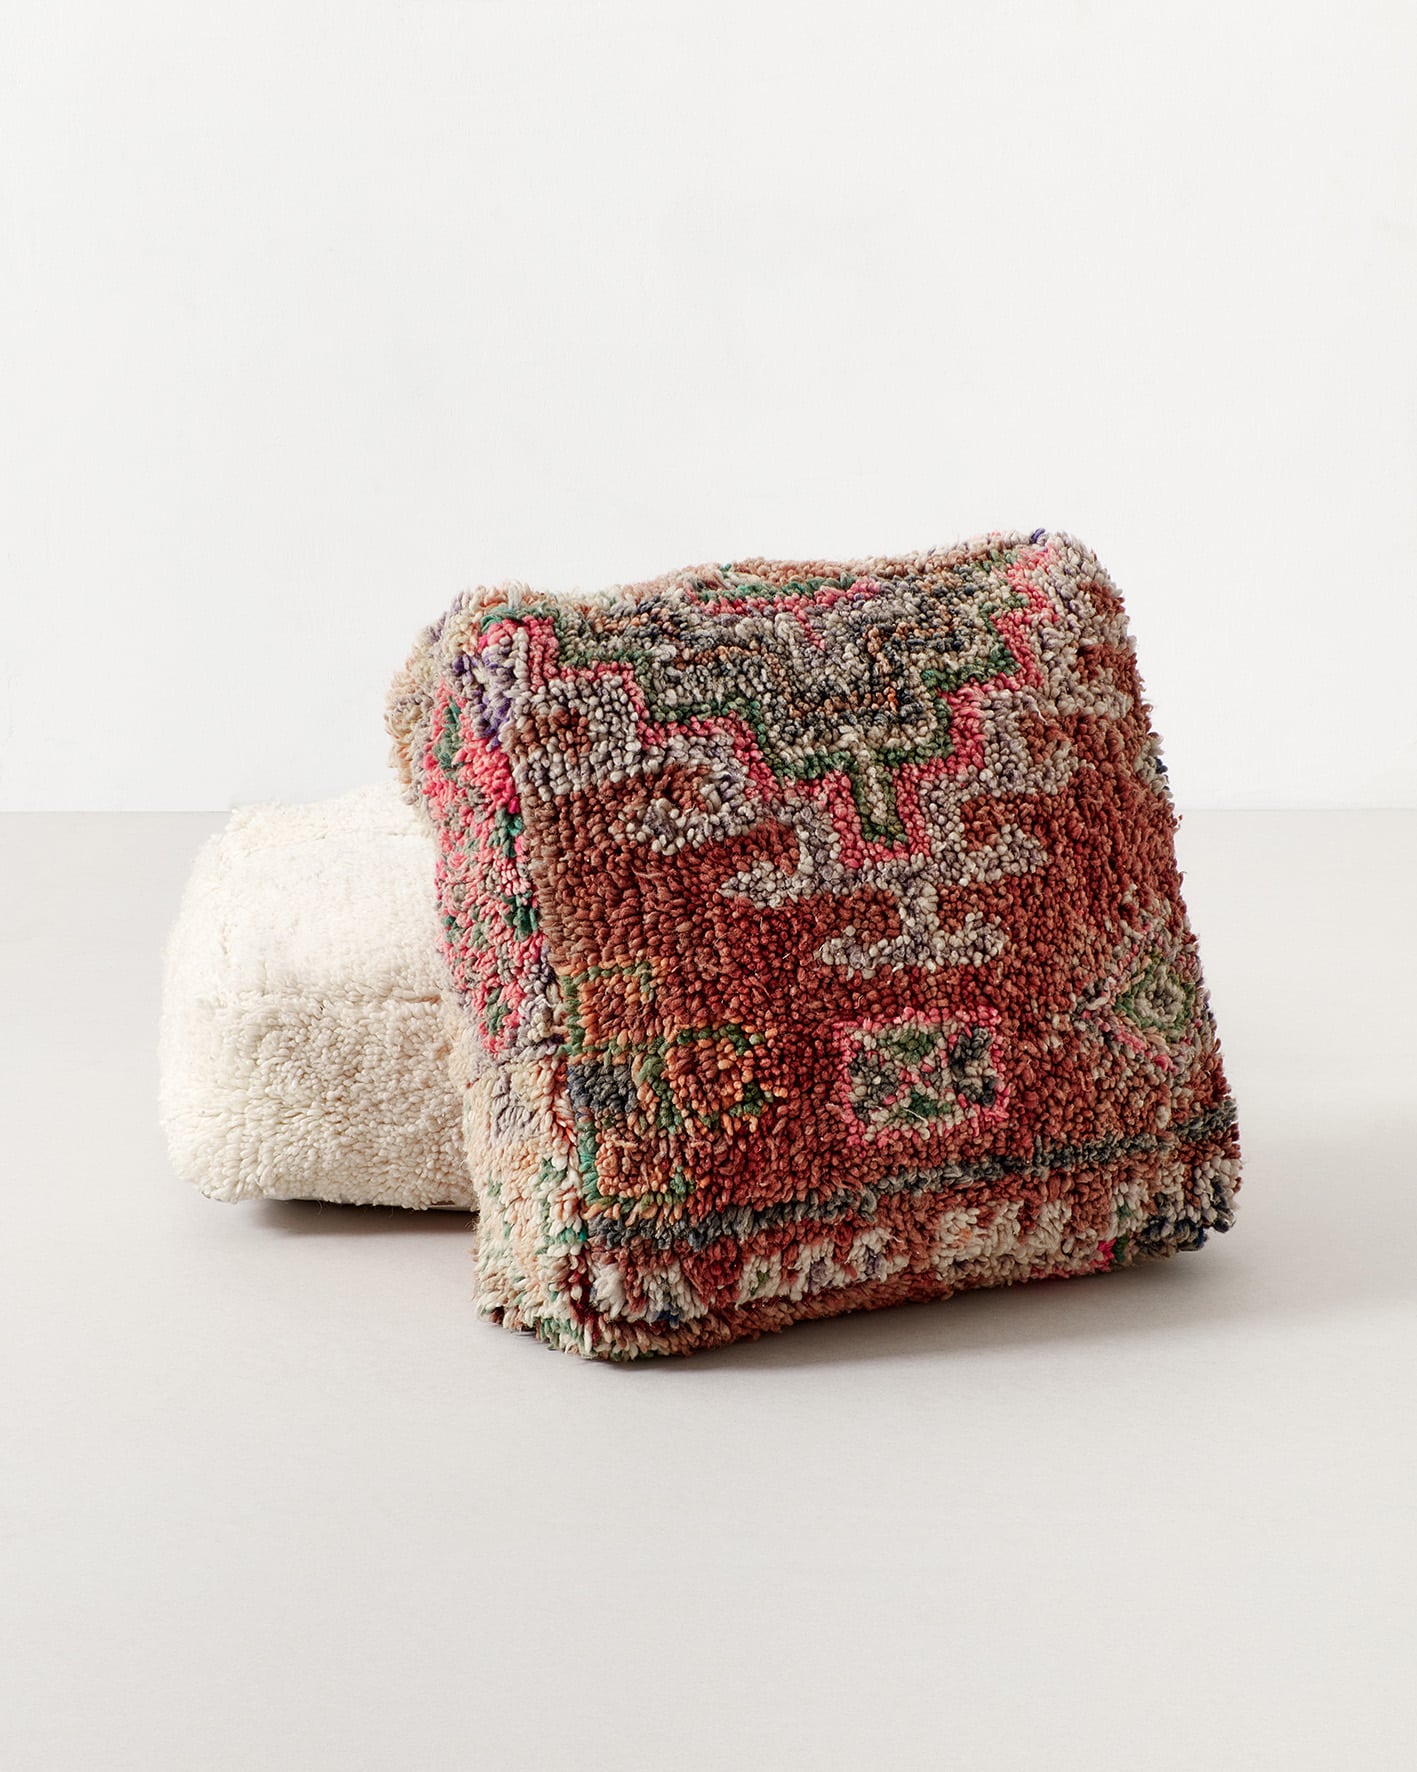 Richly decorated Moroccan pouf, upside down